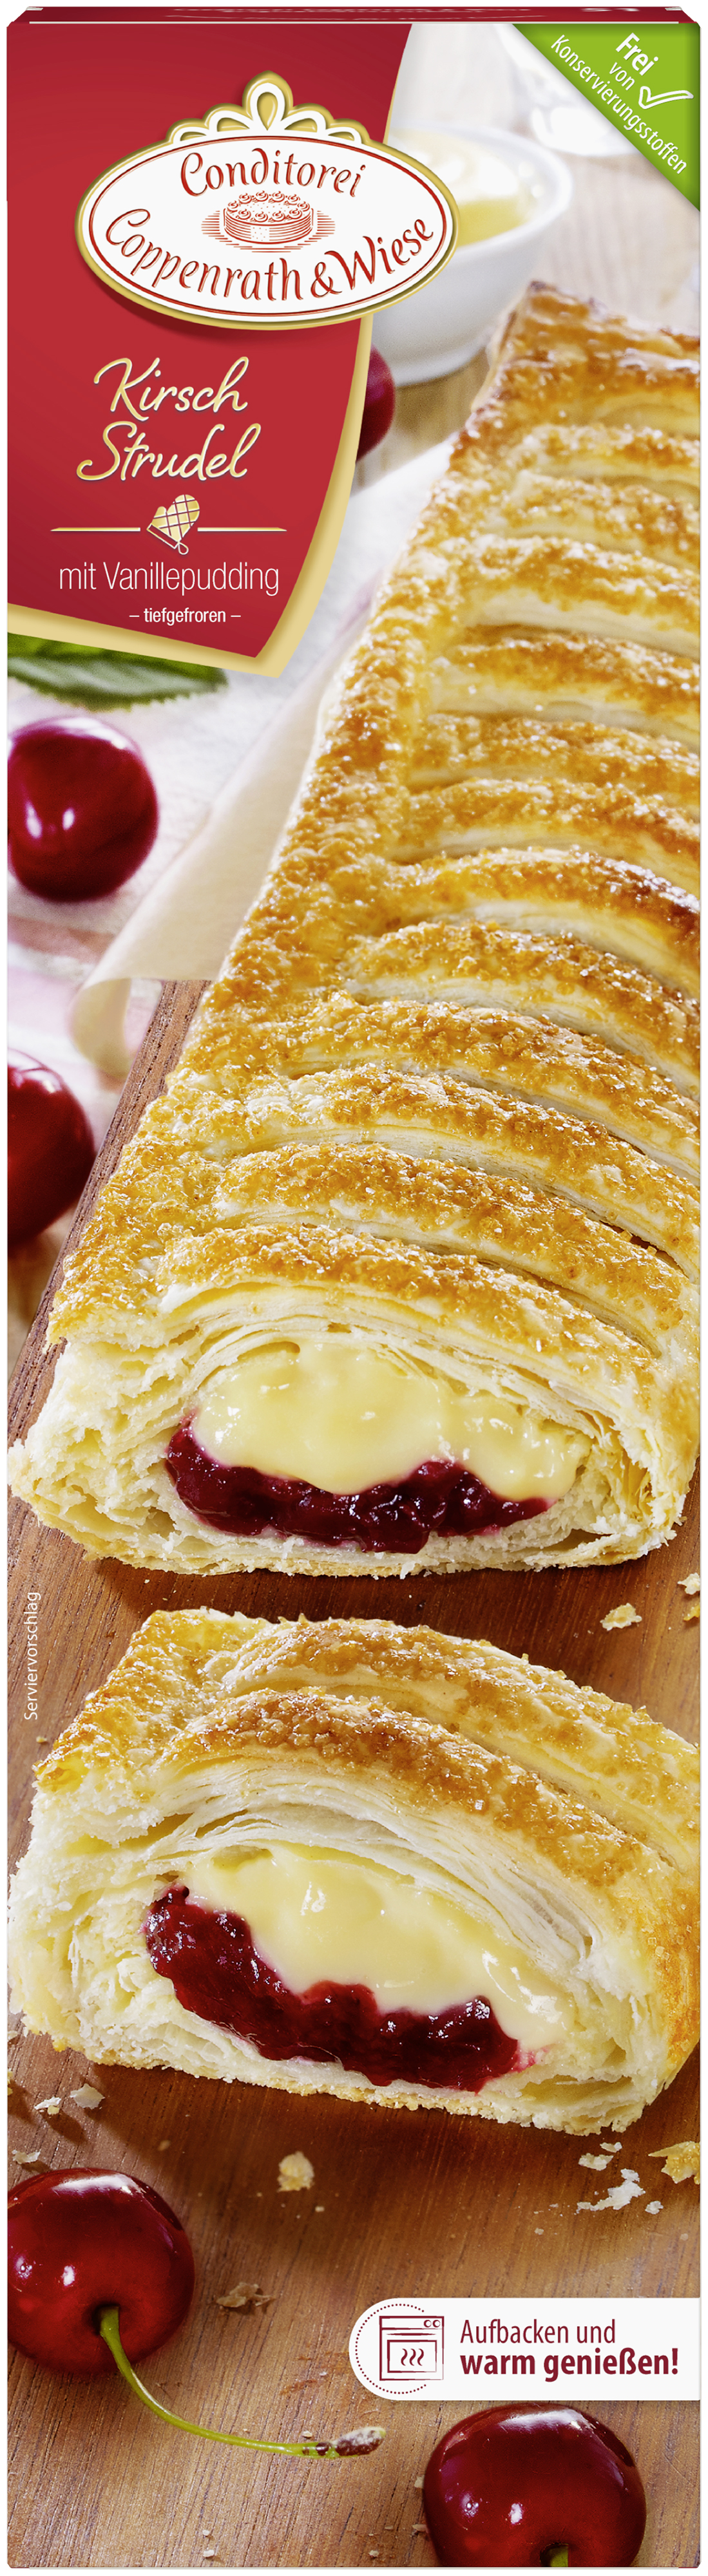 Kirsch-Strudel mit Vanillepudding (600 grams) Conditorei Coppenrath & Wiese  KG Sweet Bakery Products Food / Beverage / Tobacco Bread / Bakery Products  · mynetfair